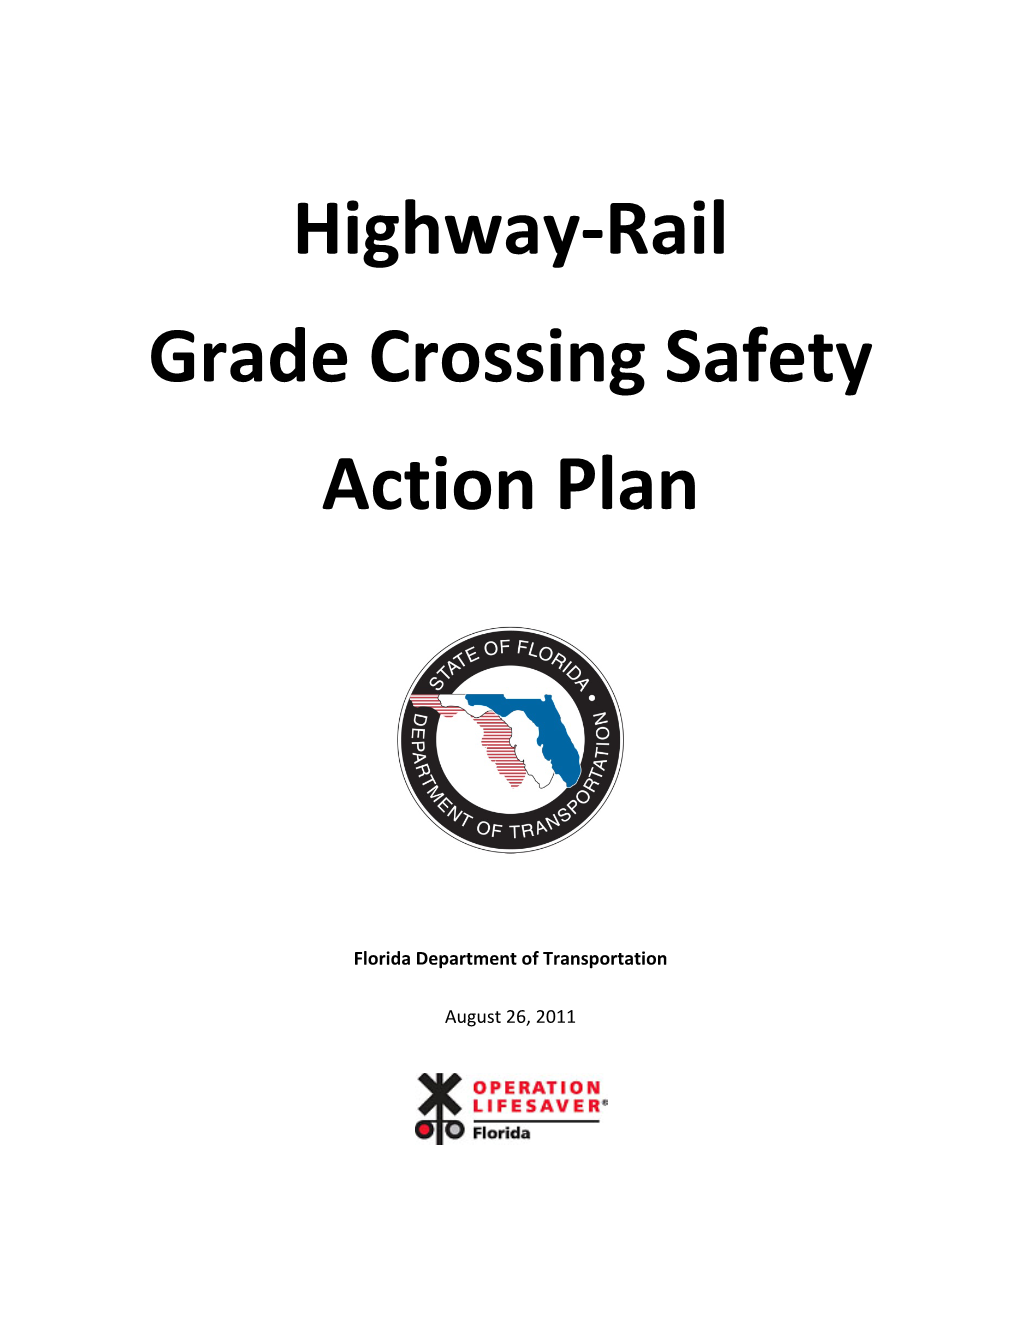 Highway-Rail Grade Crossing Safety Action Plan